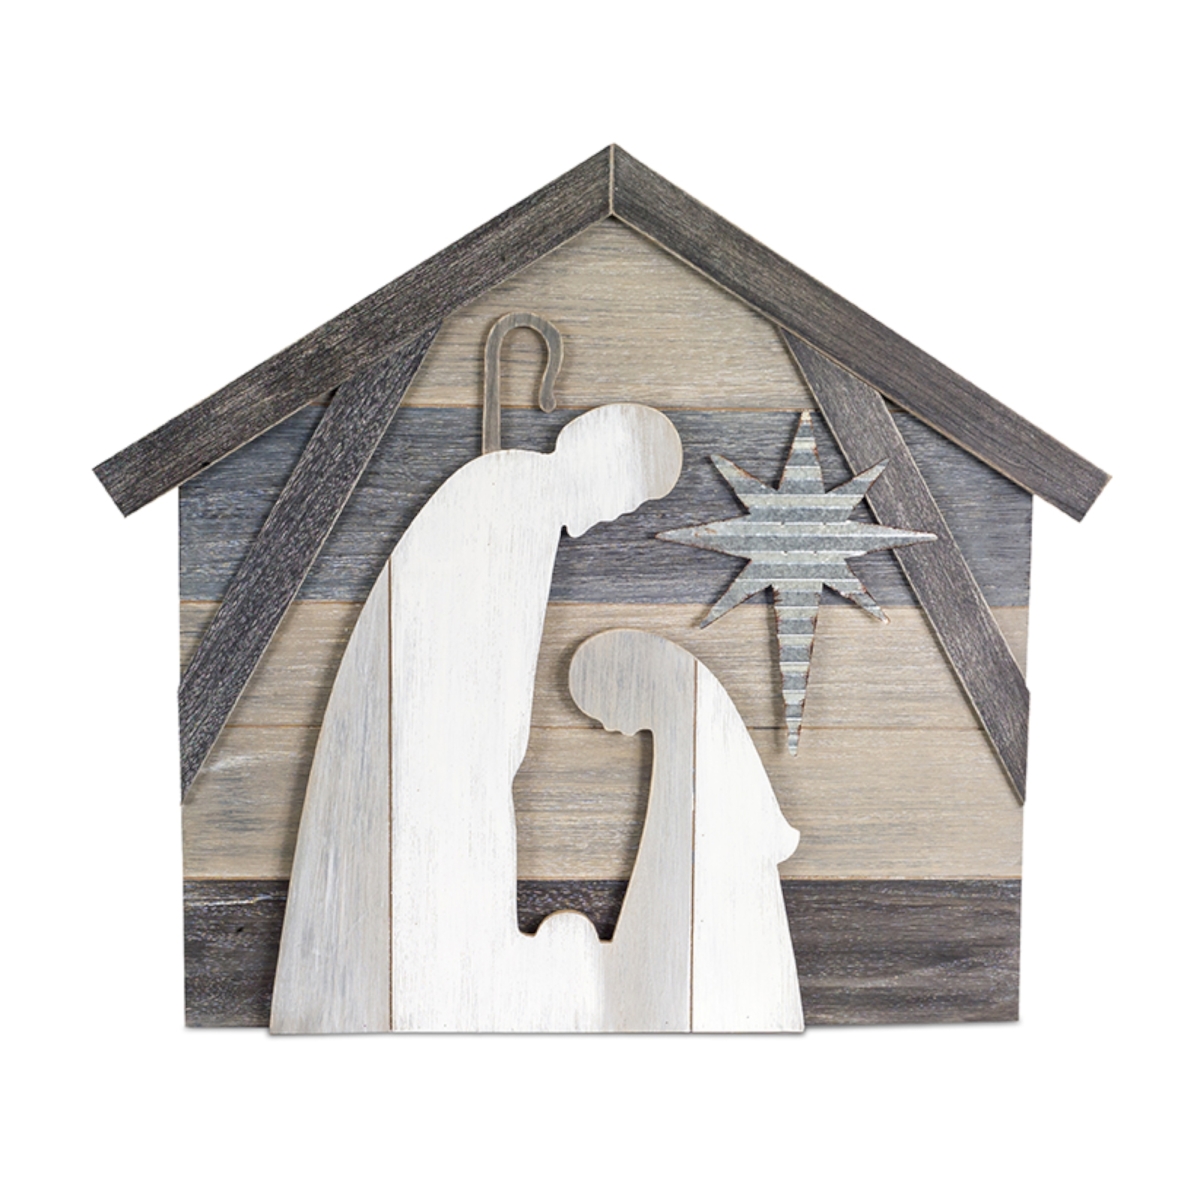 73188ds 24 X 1.25 X 27.25 In. Holy Family In Manger Cut-out Mdf, White & Grey - Set Of 2